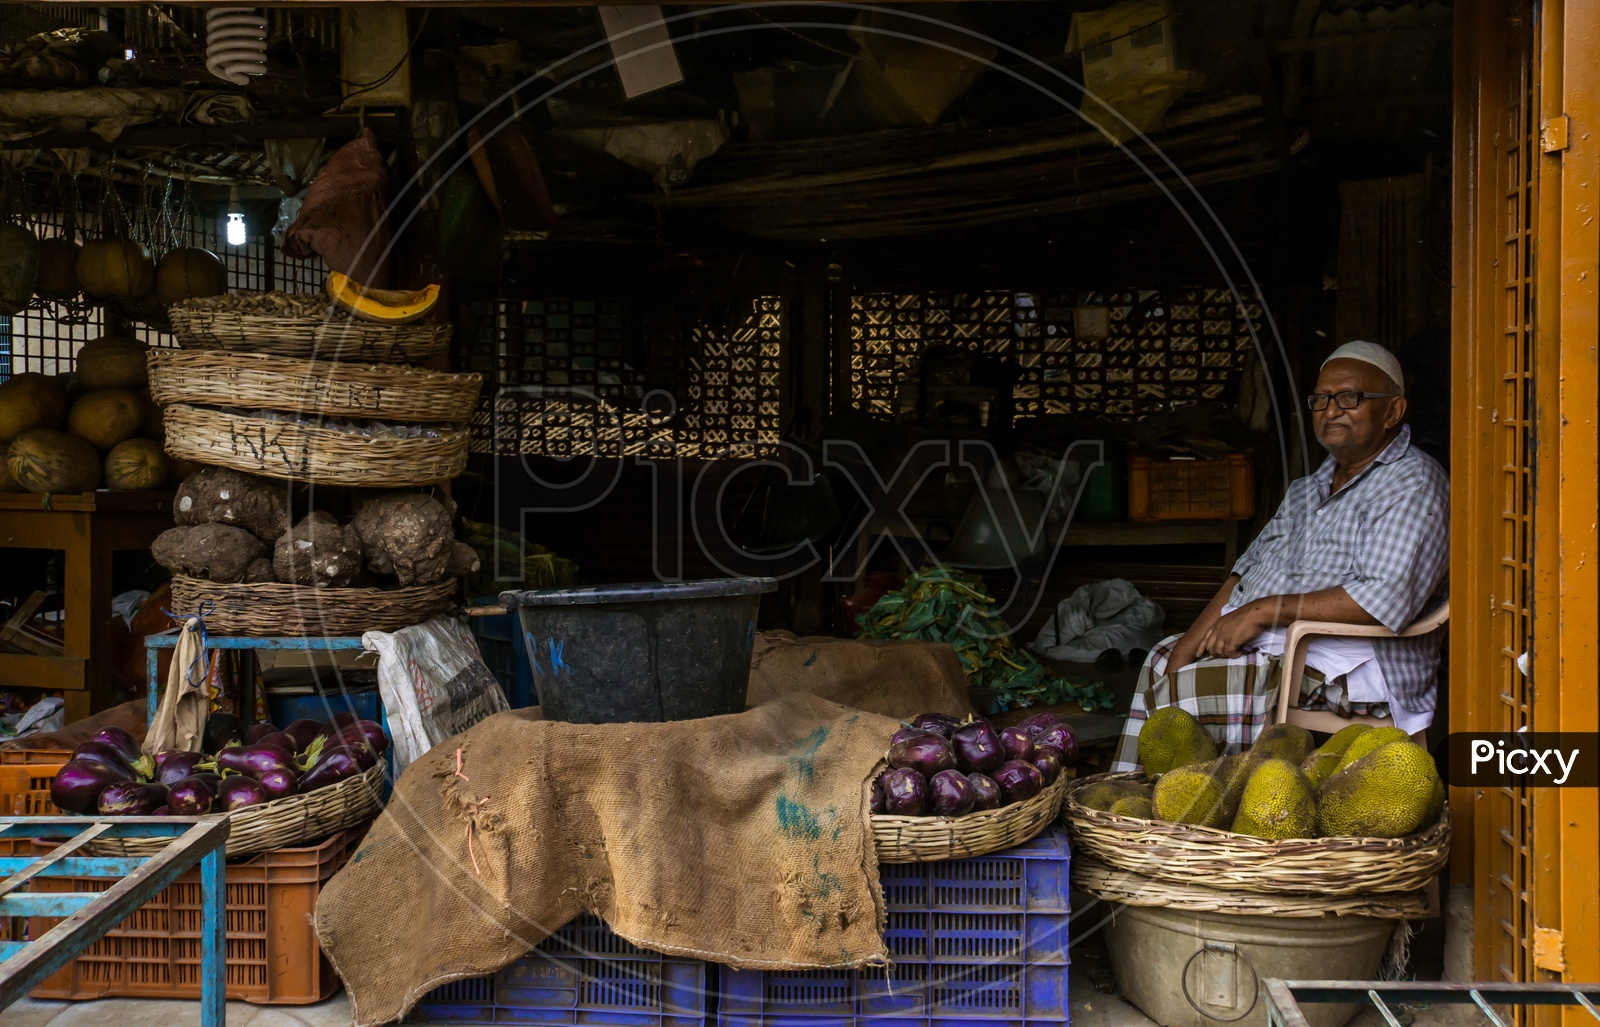 A shopkeeper in the vegetables market